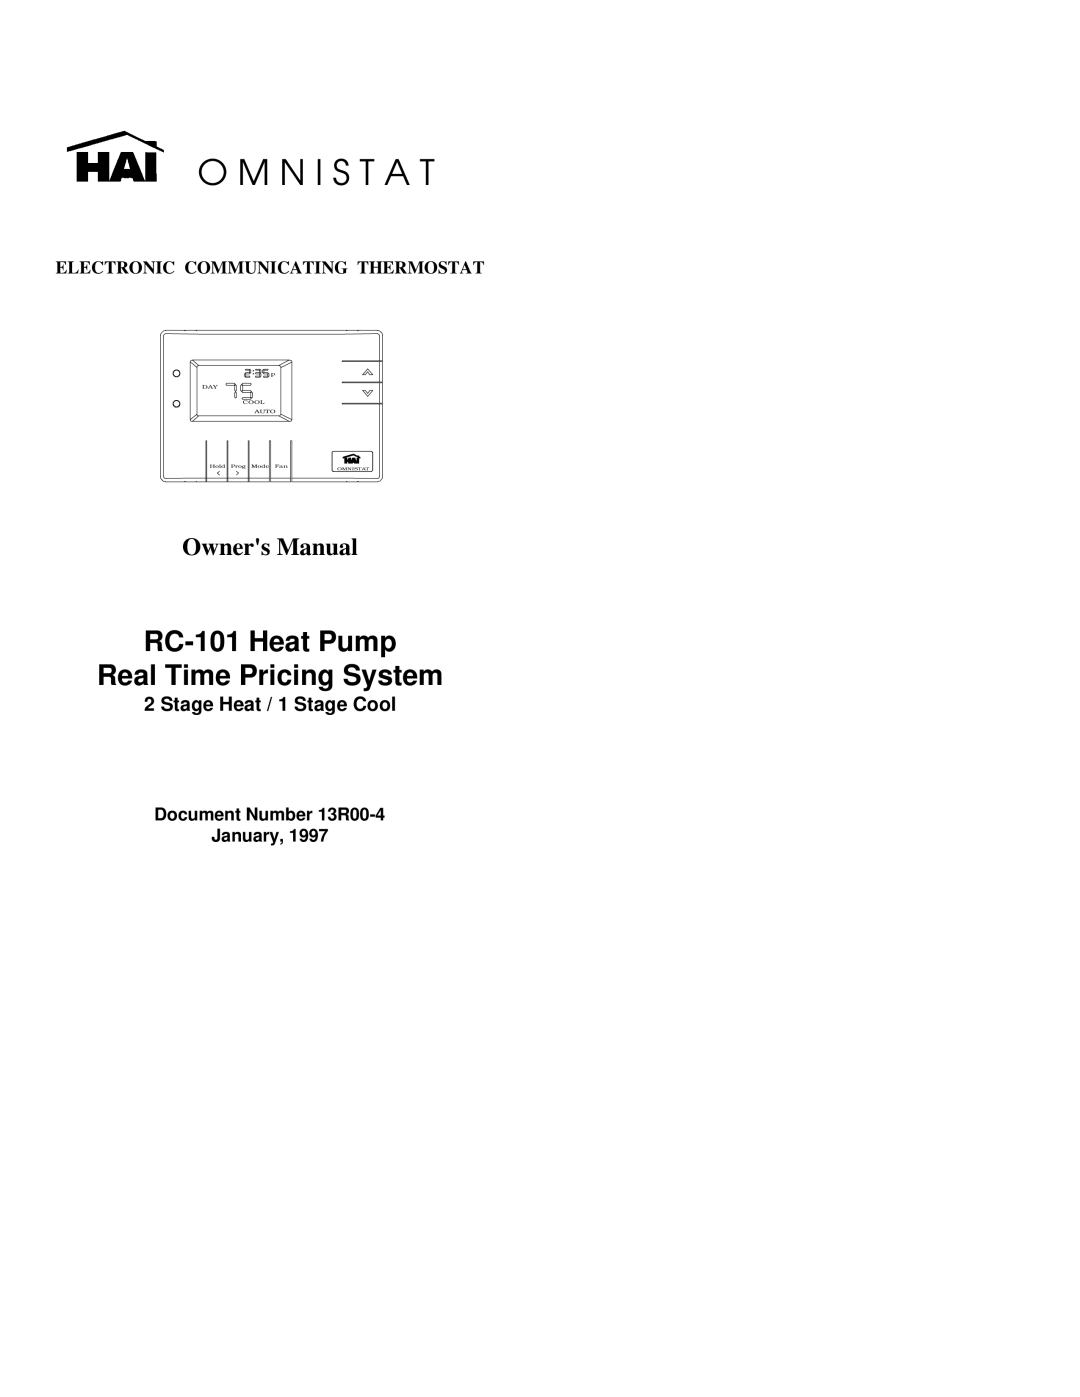 Home Automation 13R00-4 owner manual O M N I S T A T, RC-101Heat Pump Real Time Pricing System, Owners Manual, Omnistat 